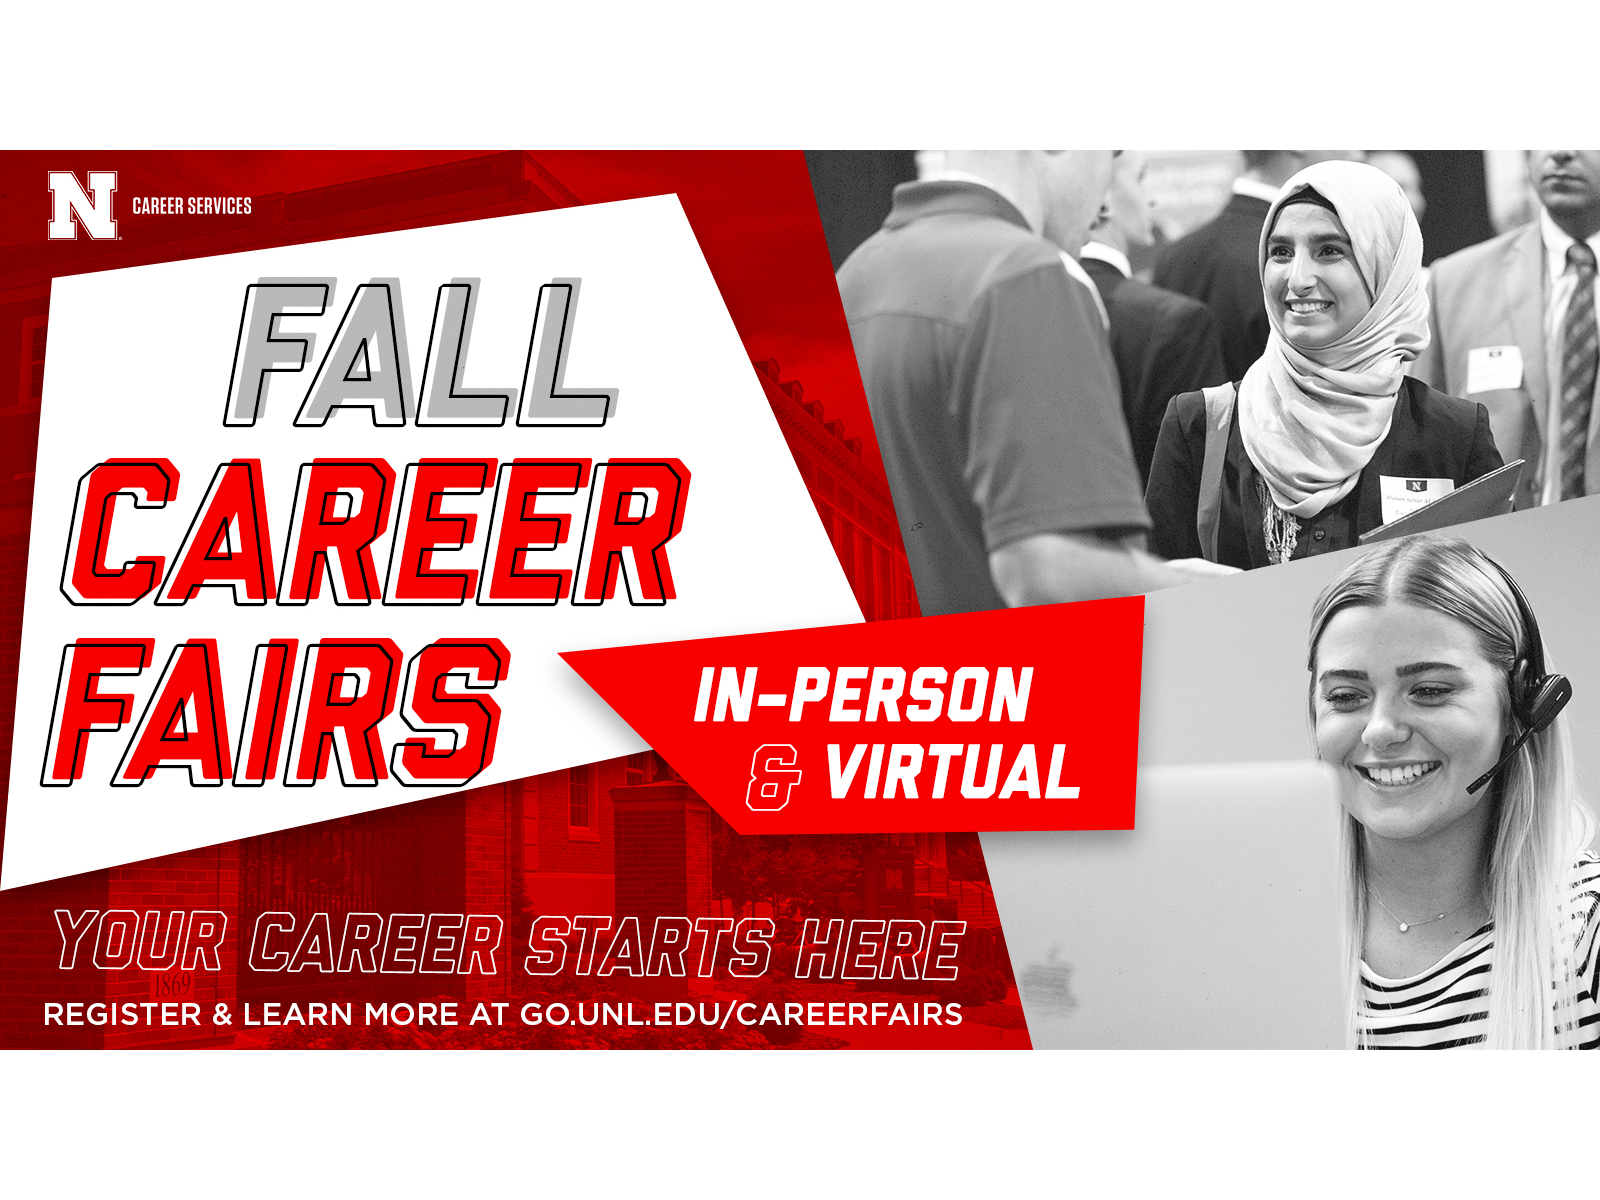 Fall Career Fairs are in-person and virtual. Register and learn more at https://go.unl.edu/careerfairs